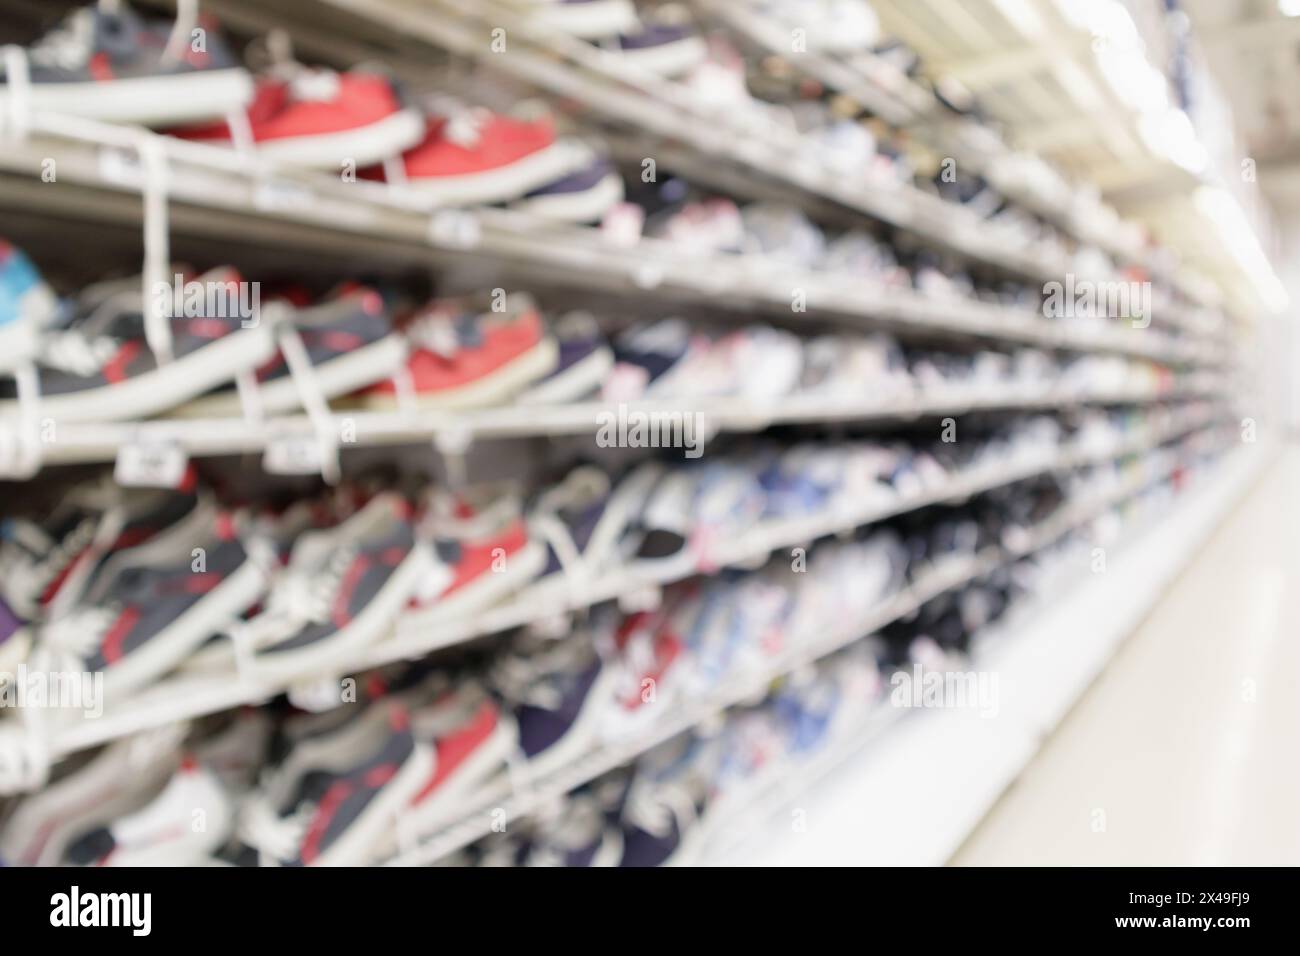 Abstract blur sport shoes on shelves in sneakers shop store background Stock Photo